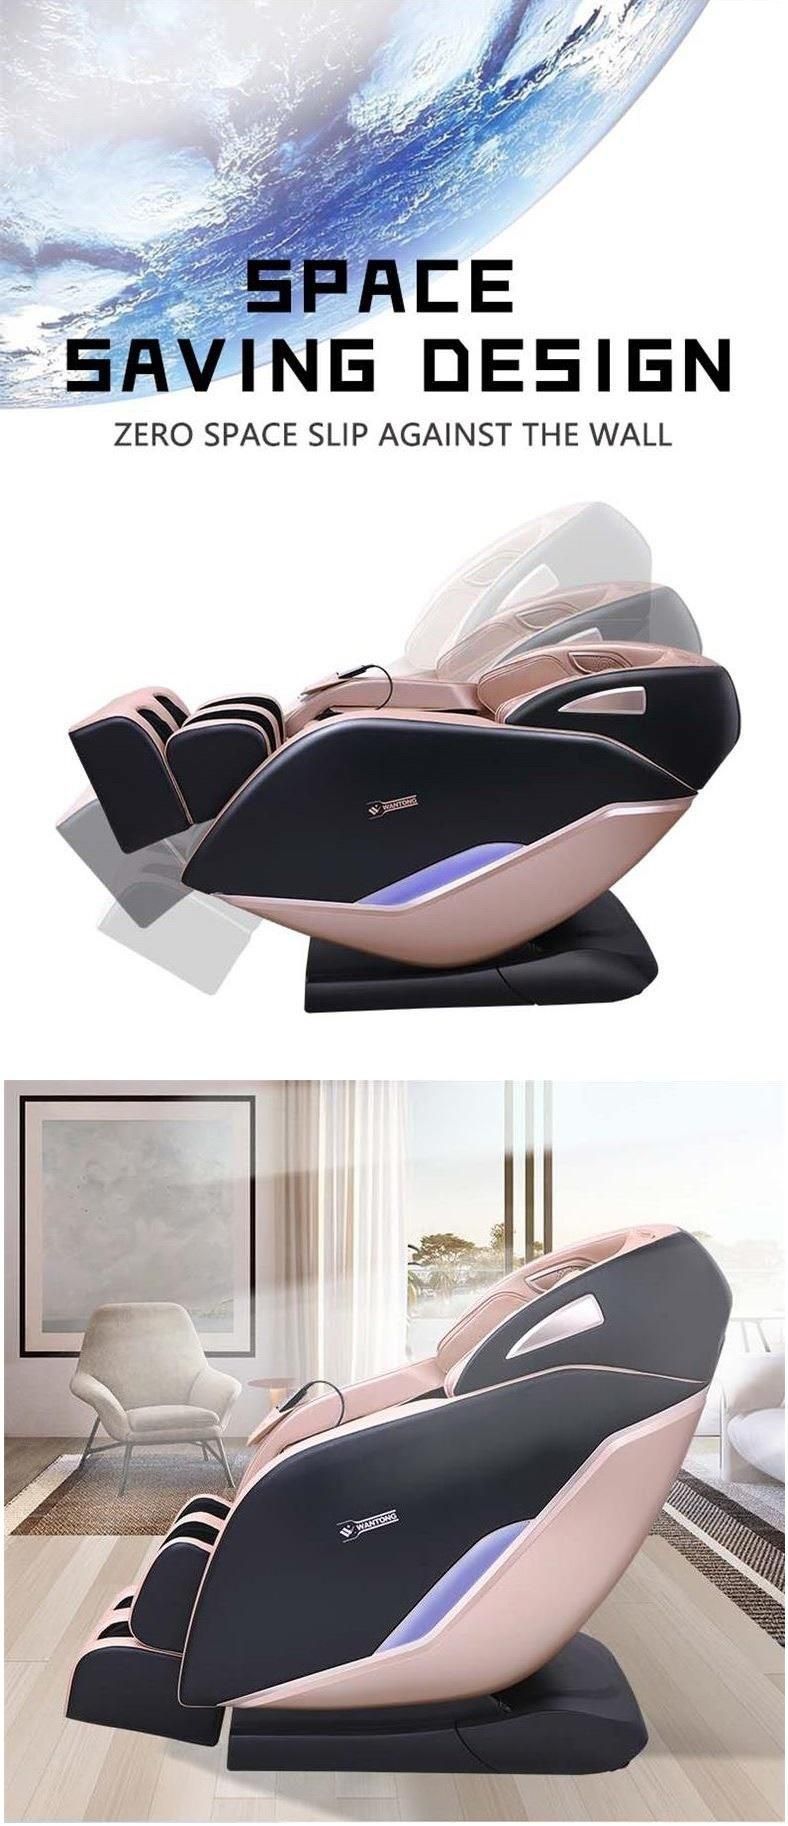 2020 Wholesale High Quality Body Care Luxury Family Healthcare 3D Massage Chair